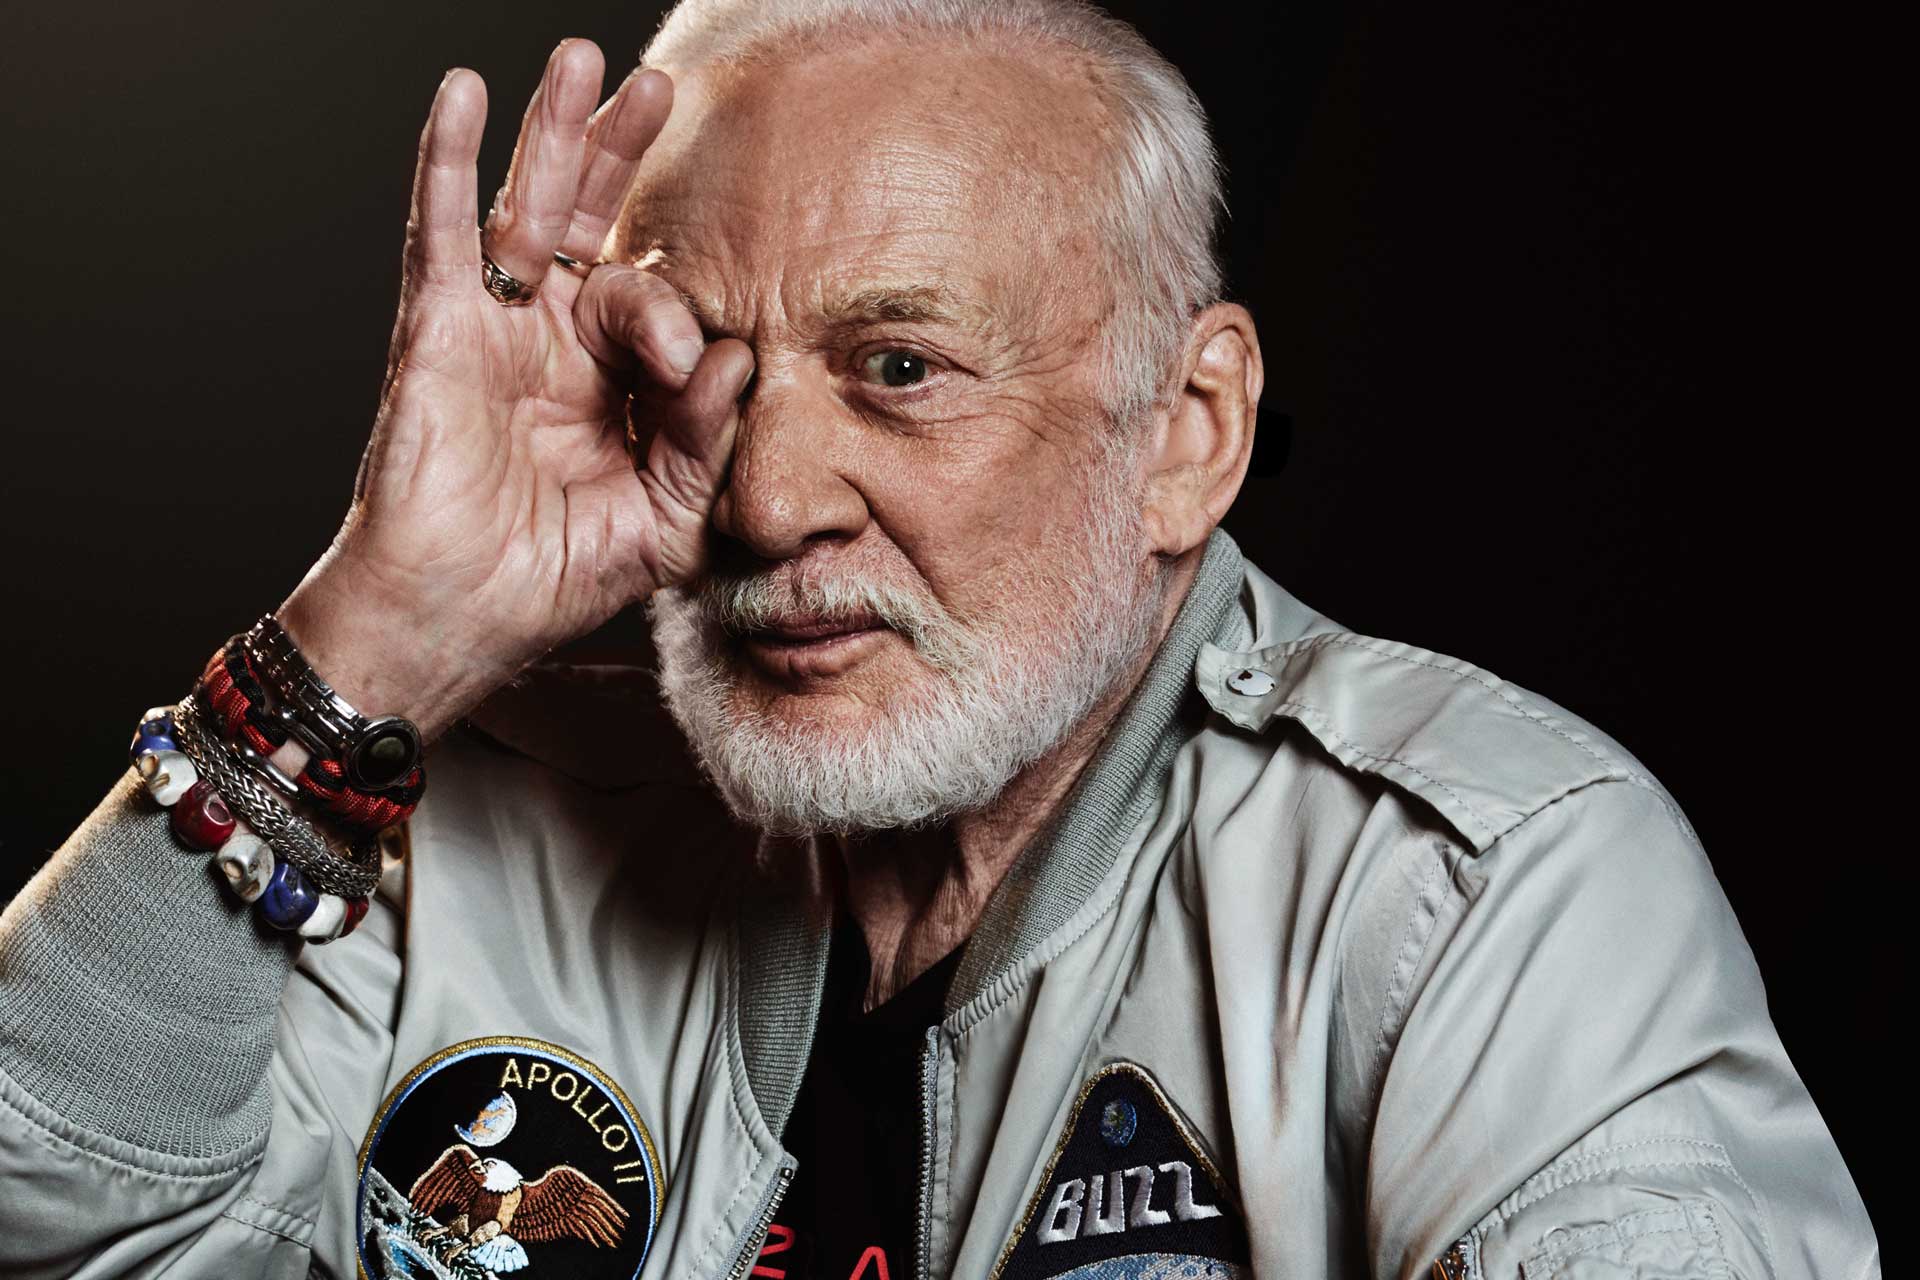 20 Omega Buzz Aldrin Symbolic Pics of the Month 08/17